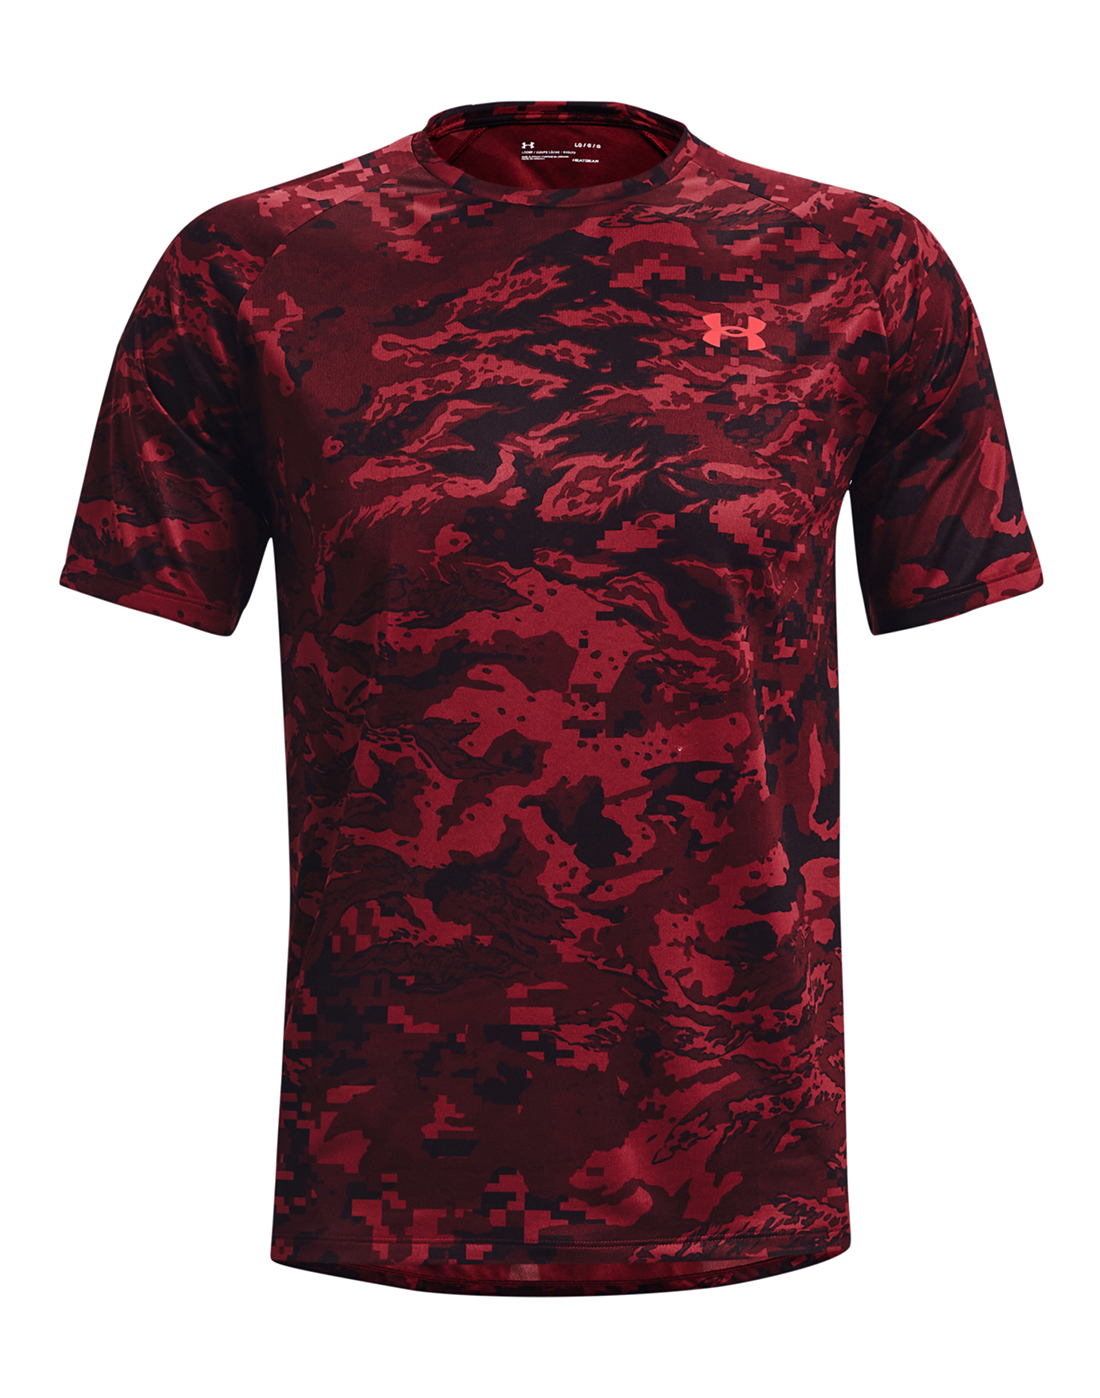 Under Armour Mens Tech 2.0 Camo T-Shirt - Red | Life Style Sports IE